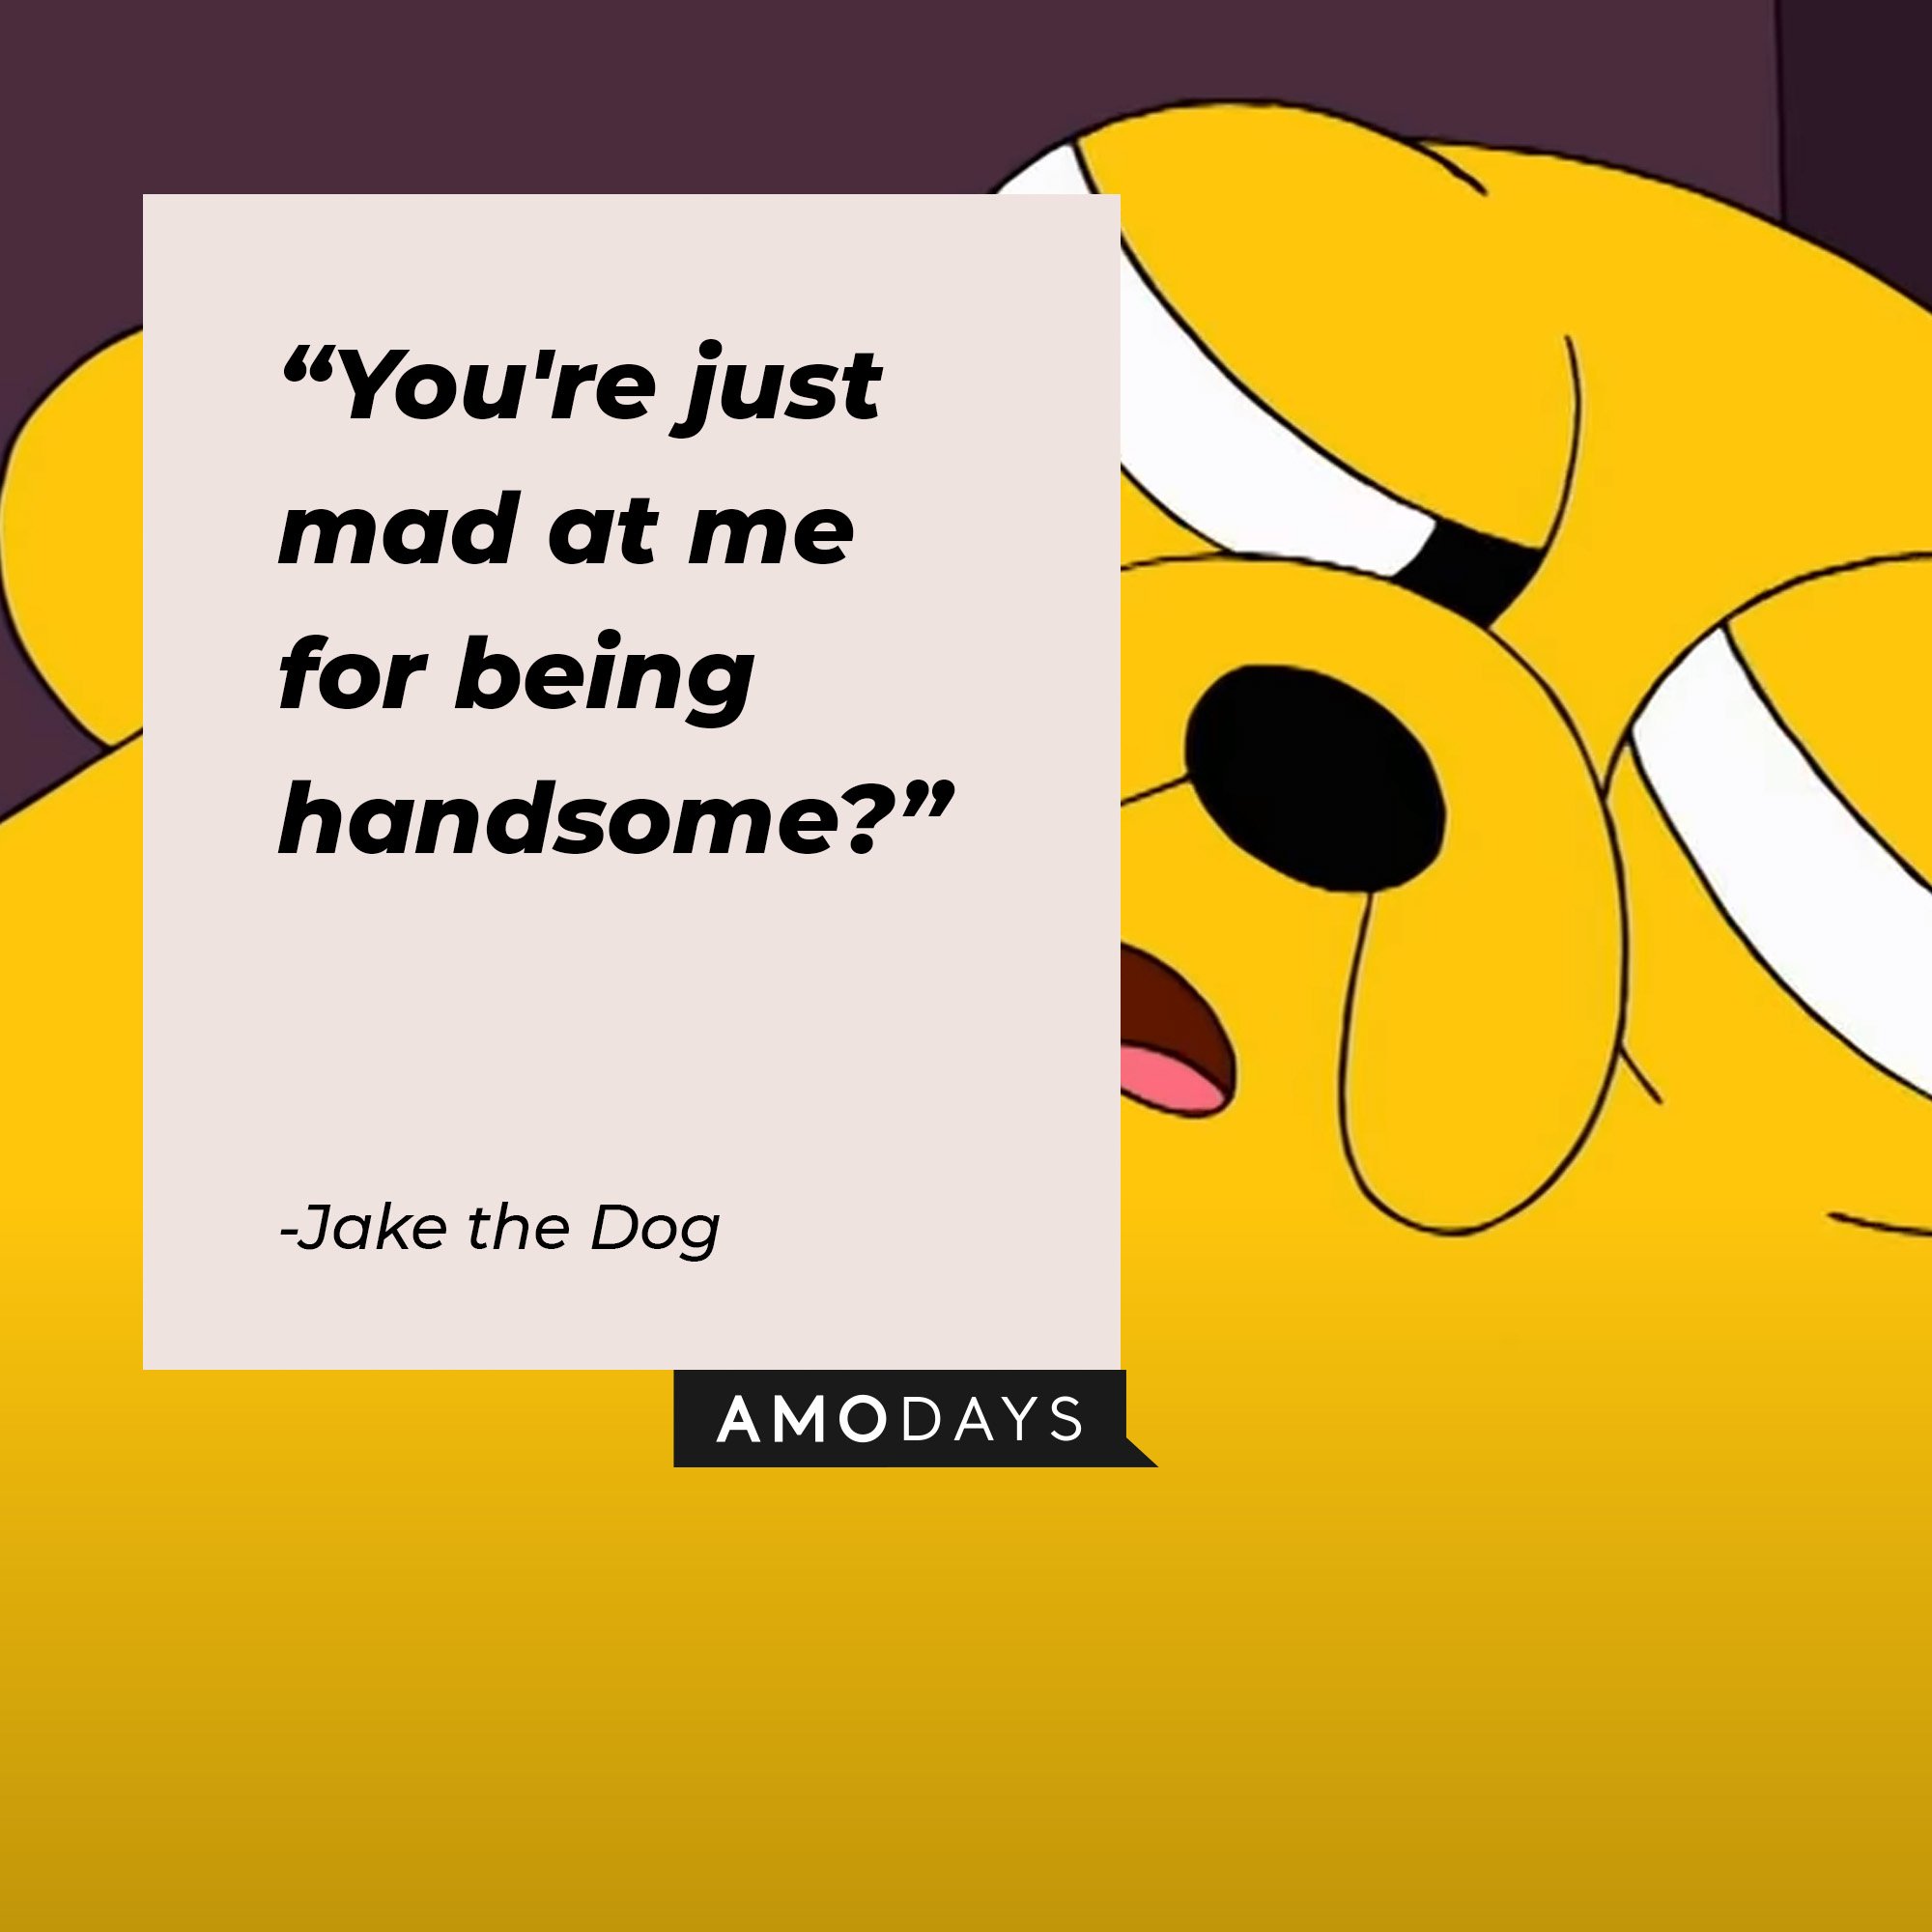  Jake the Dog’s quote: "You're just mad at me for being handsome?" Image: AmoDays